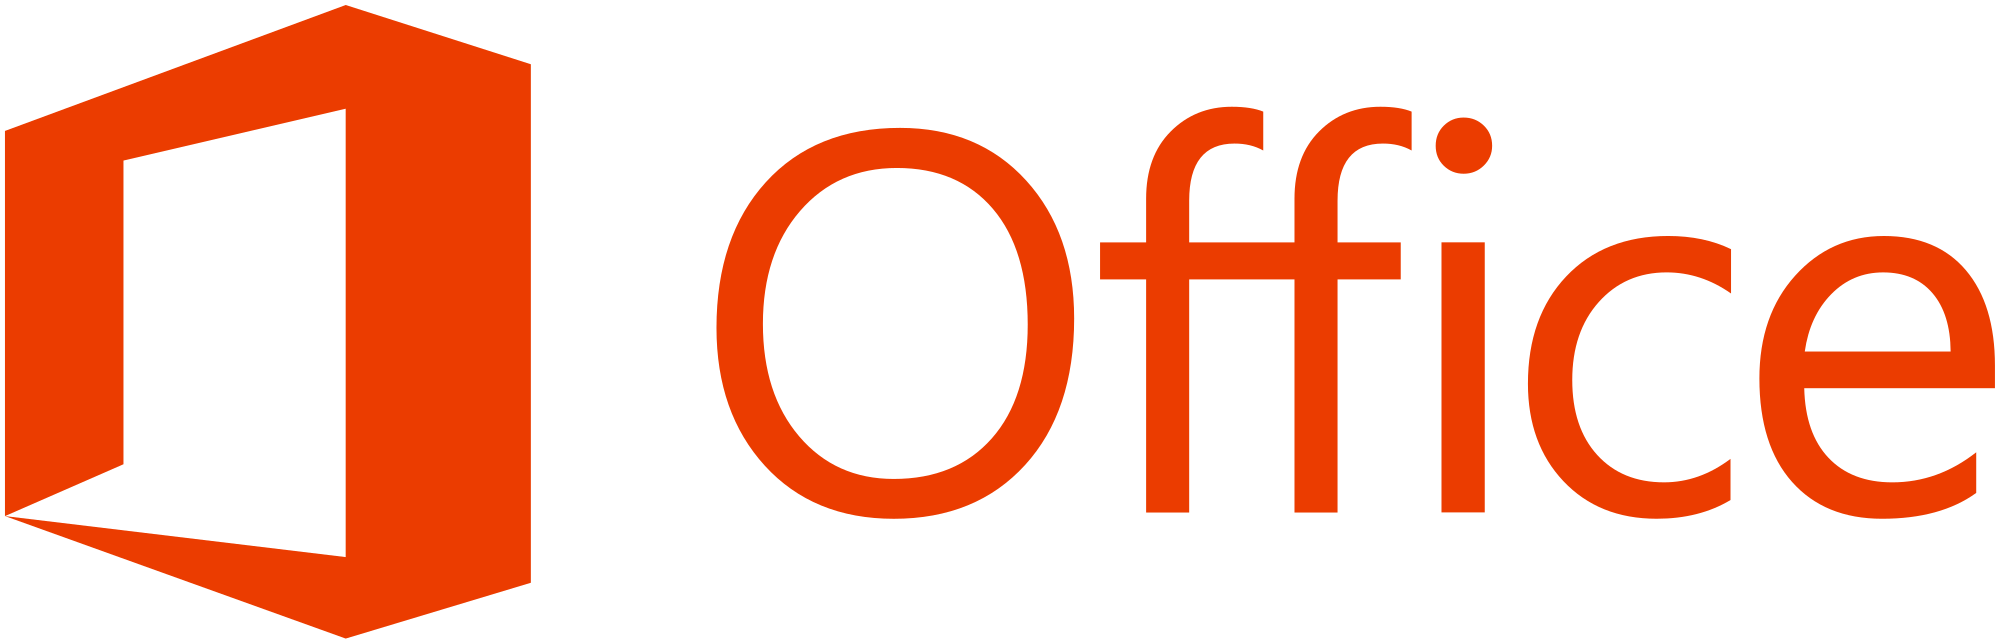 Office 2013 Logo - File:Microsoft Office 2013 logo and wordmark.svg - Wikimedia Commons